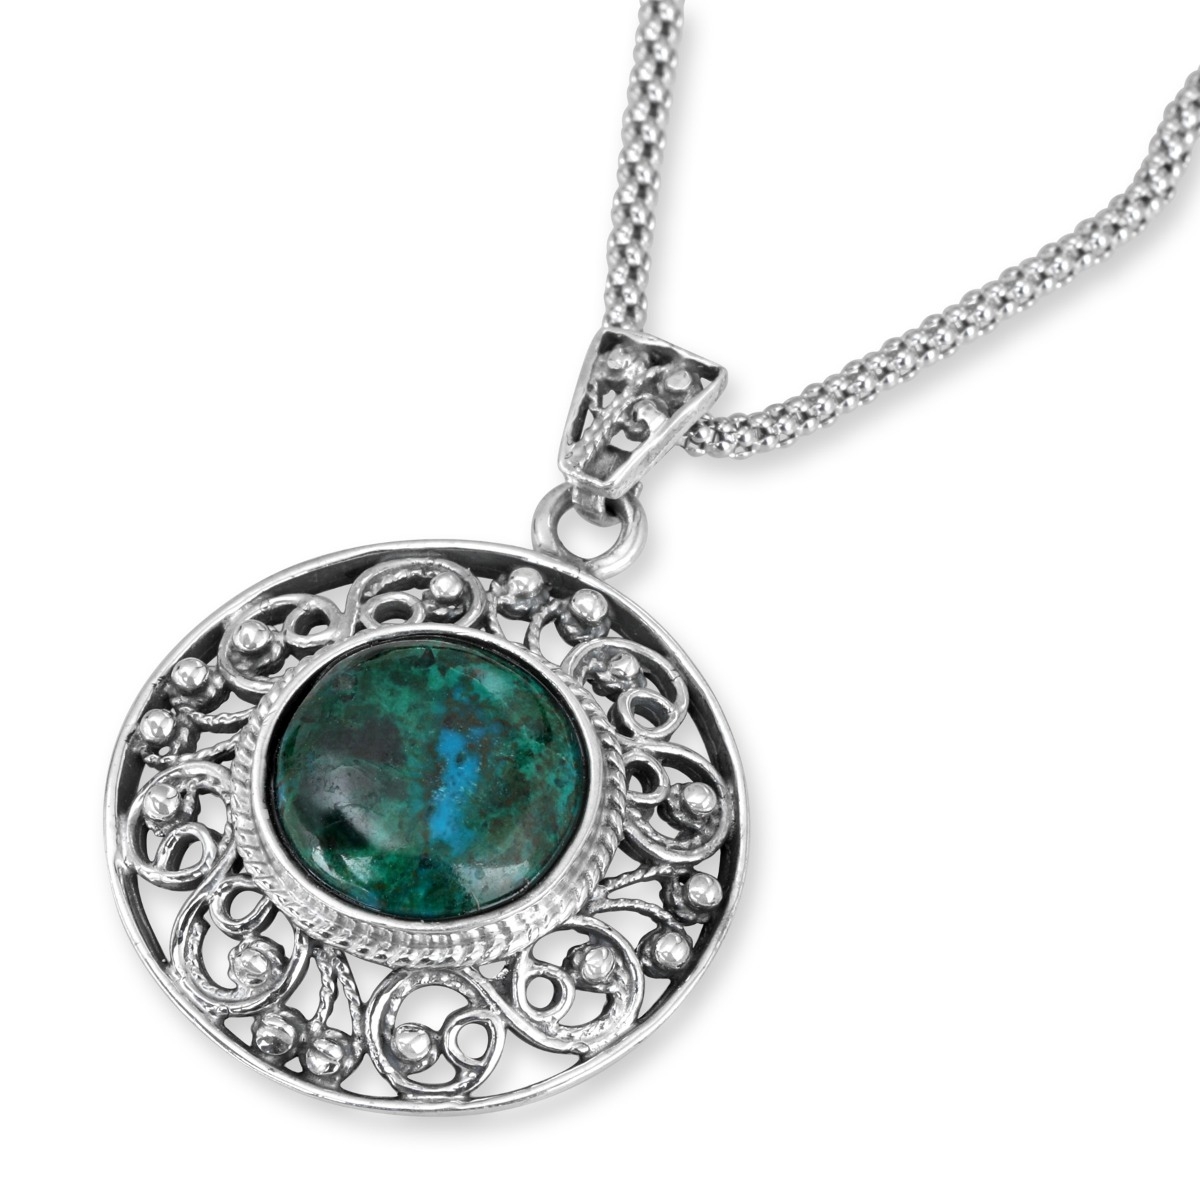 Rafael Jewelry 925 Sterling Silver Circular Vintage Eilat Stone Necklace - 1